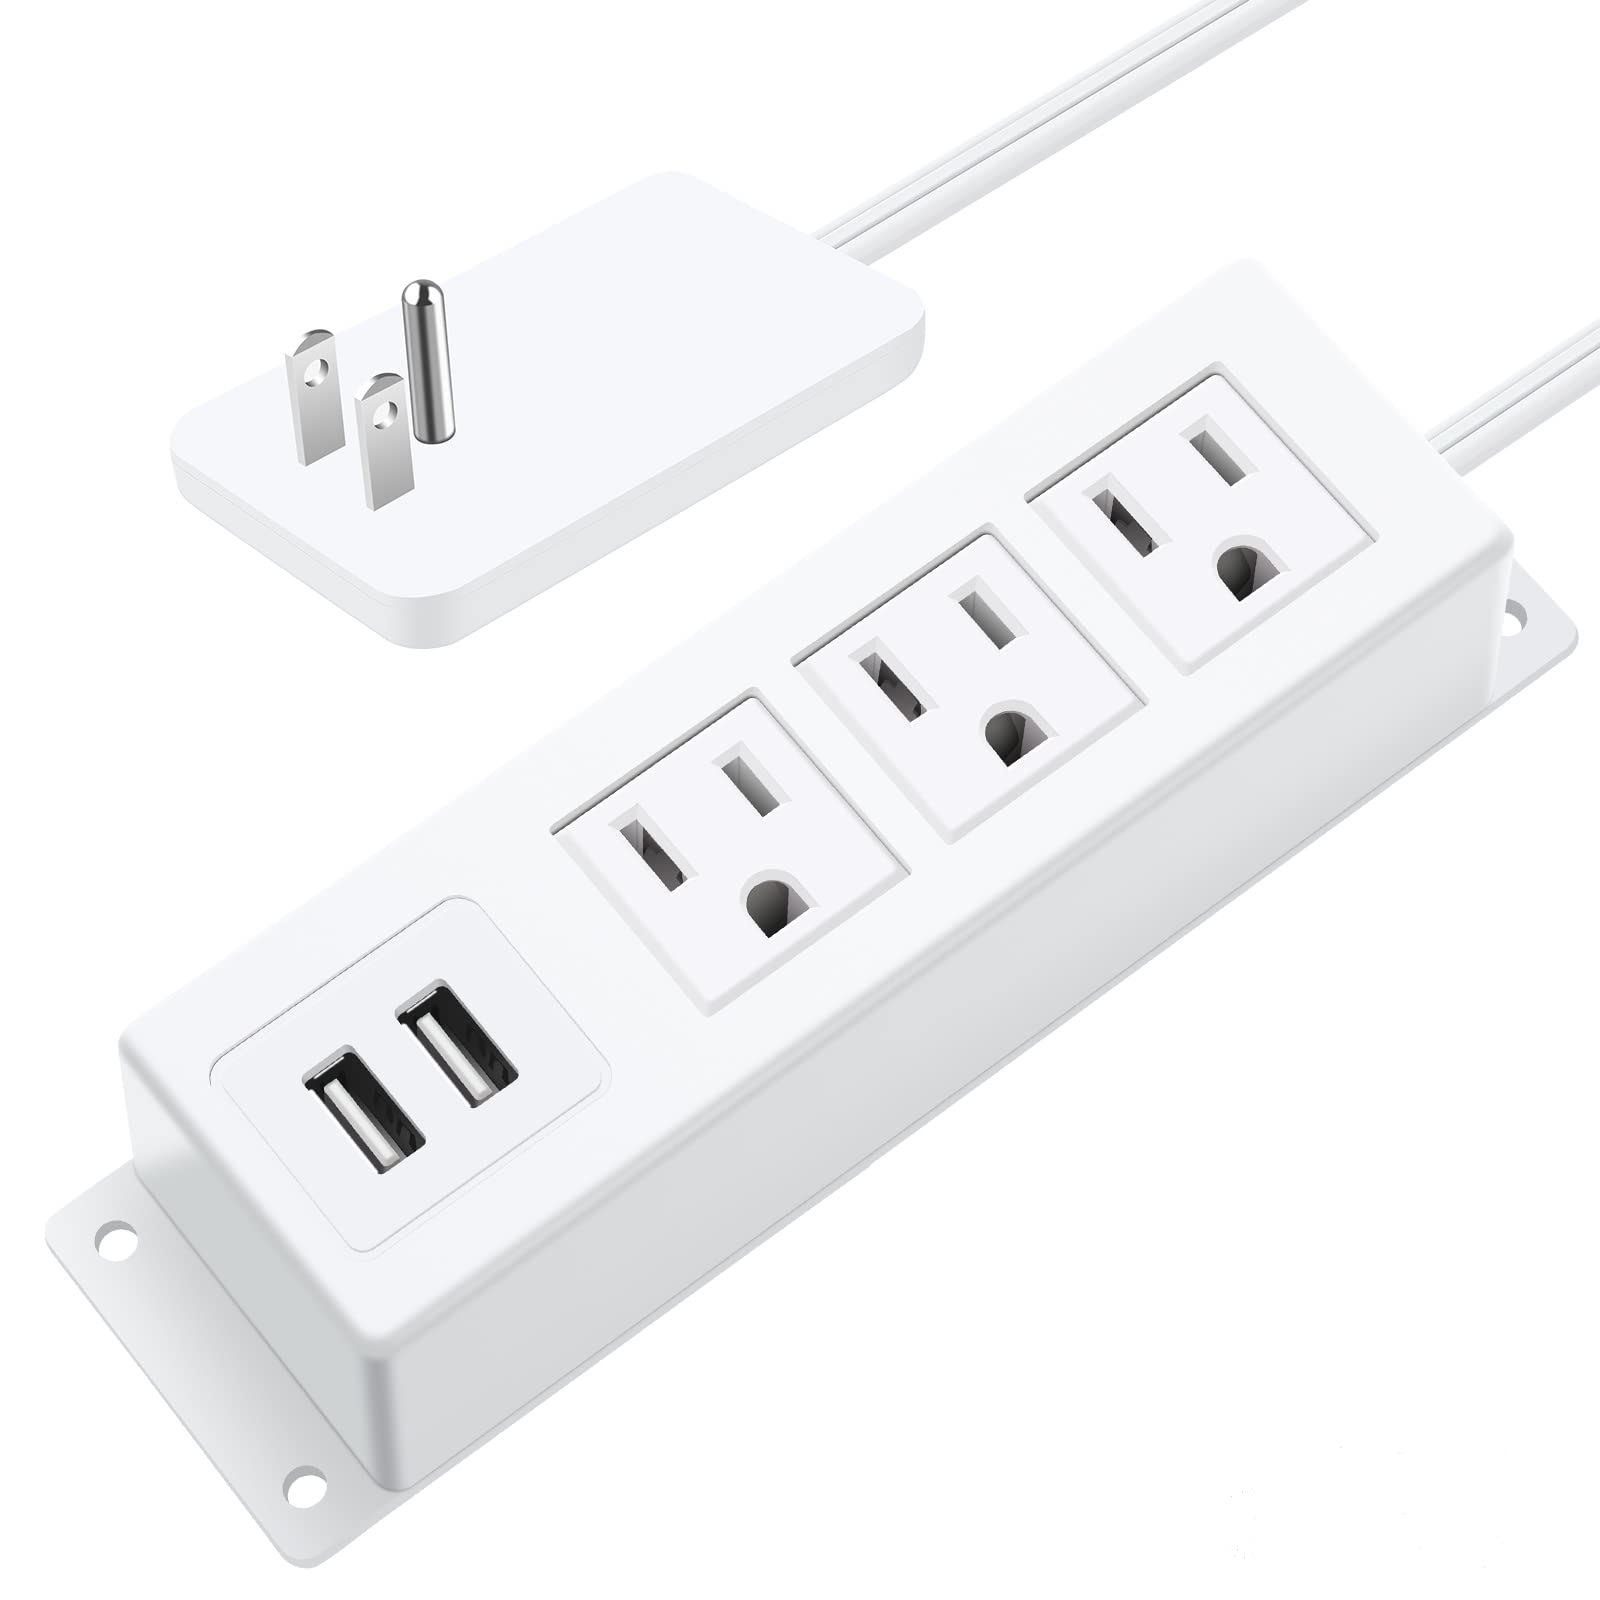 Thin Flat Plug Power Strip, JUNNUJ Wall Outlet Cover 1200J Surge